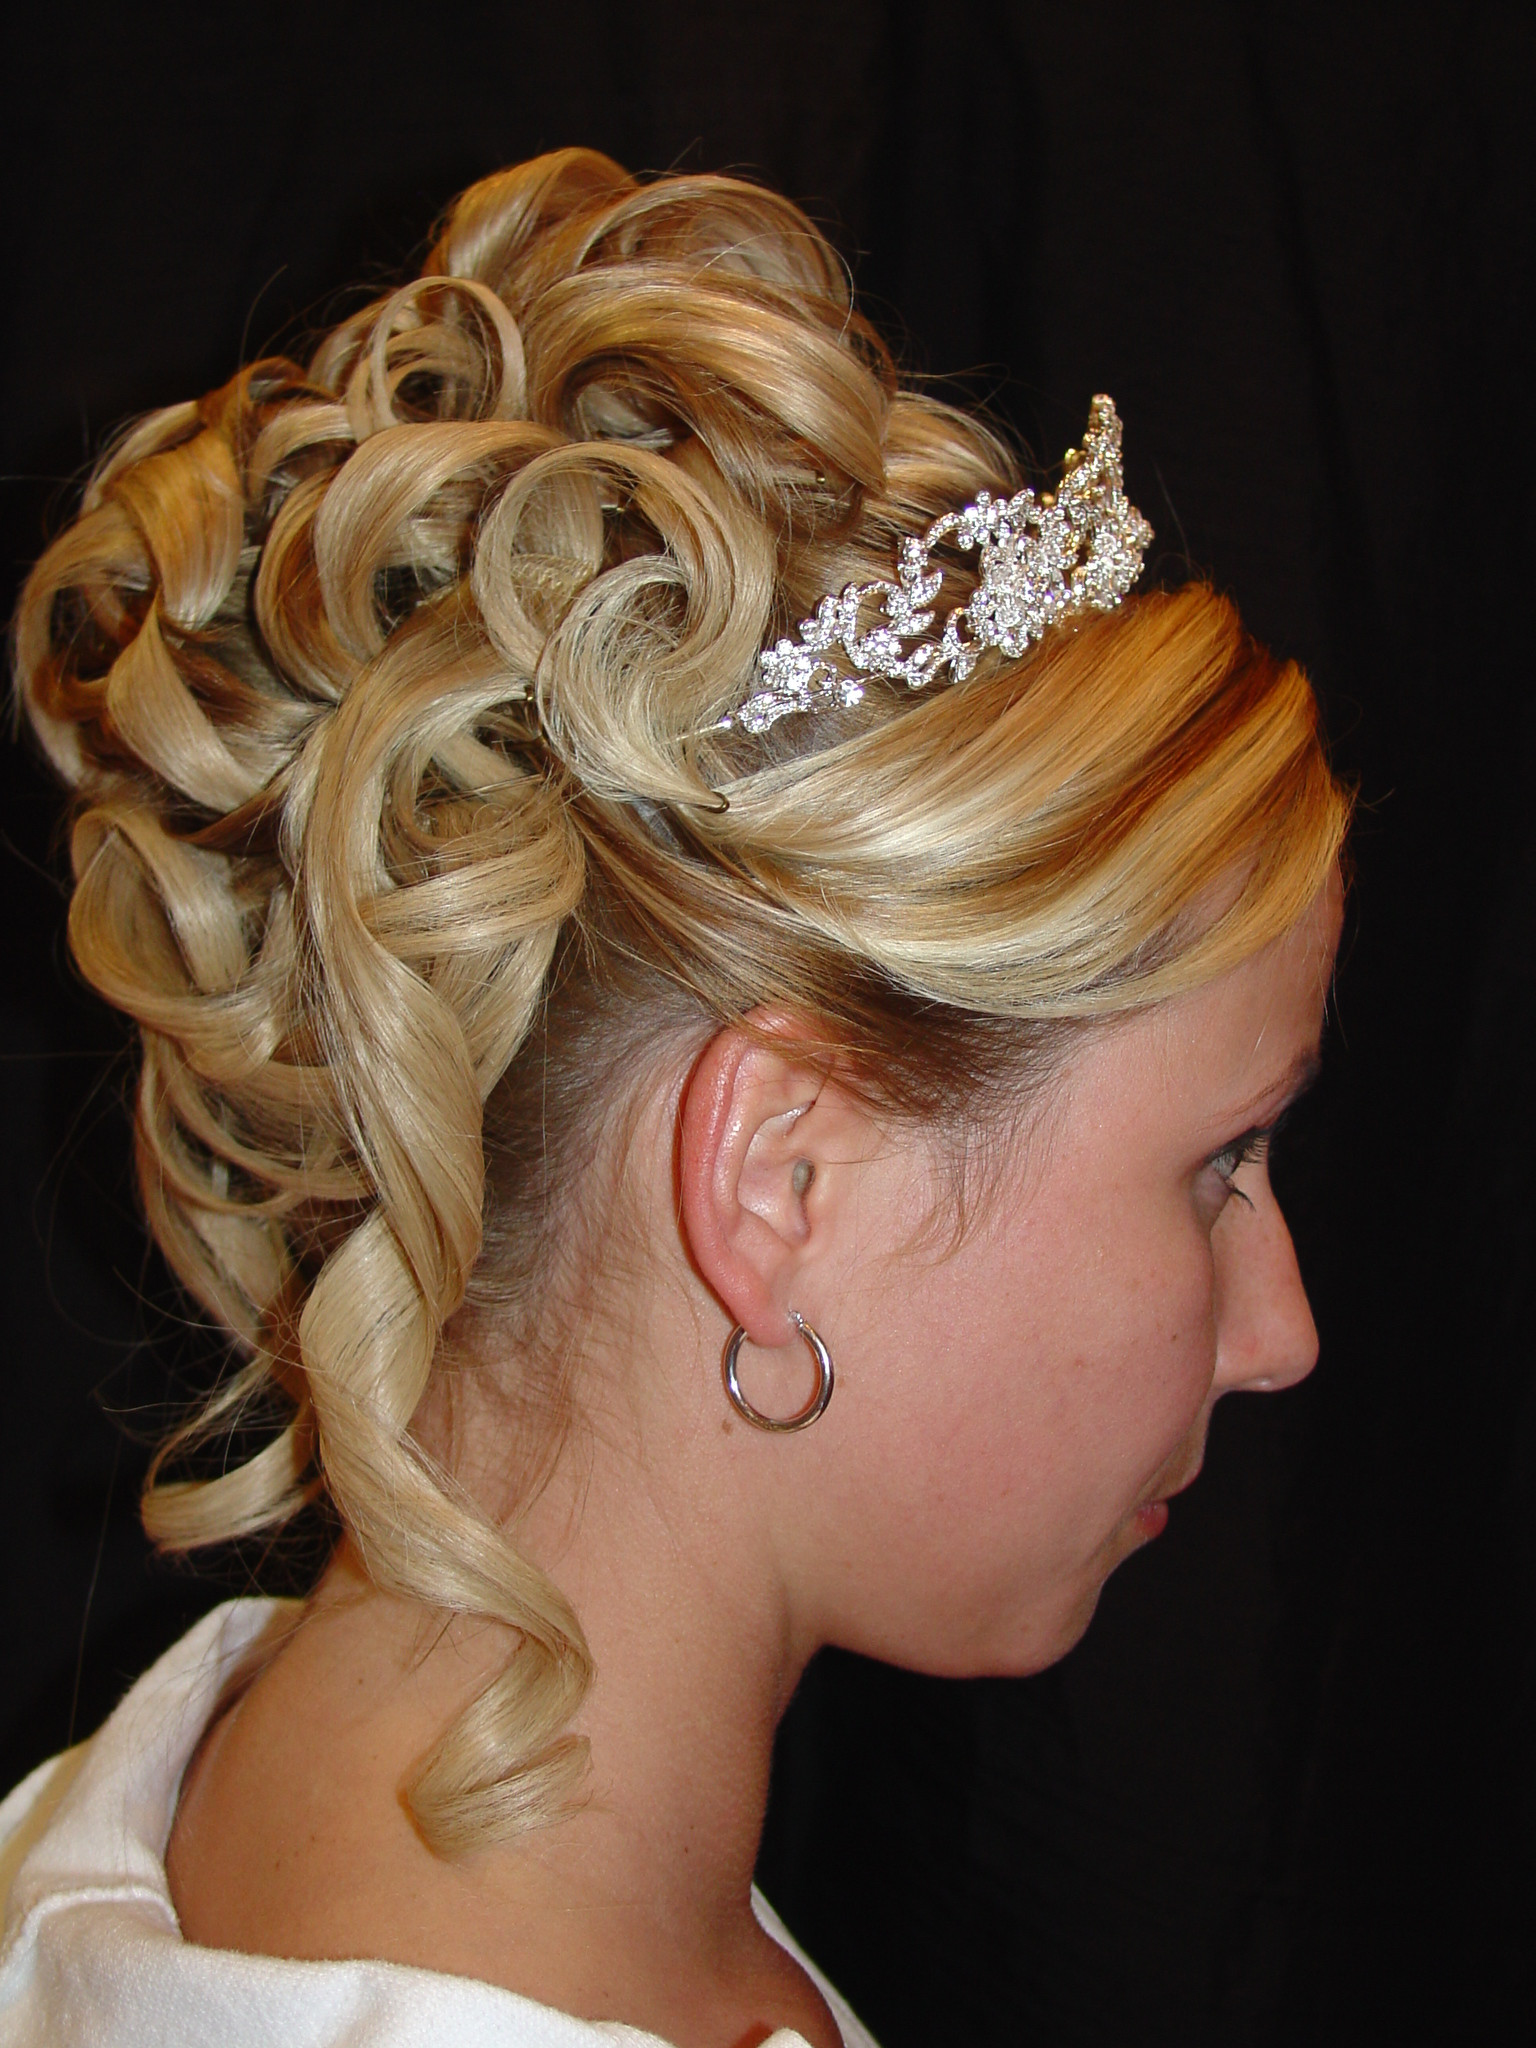 Cute Updo Hairstyles For Homecoming
 Updo Hairstyles For Prom